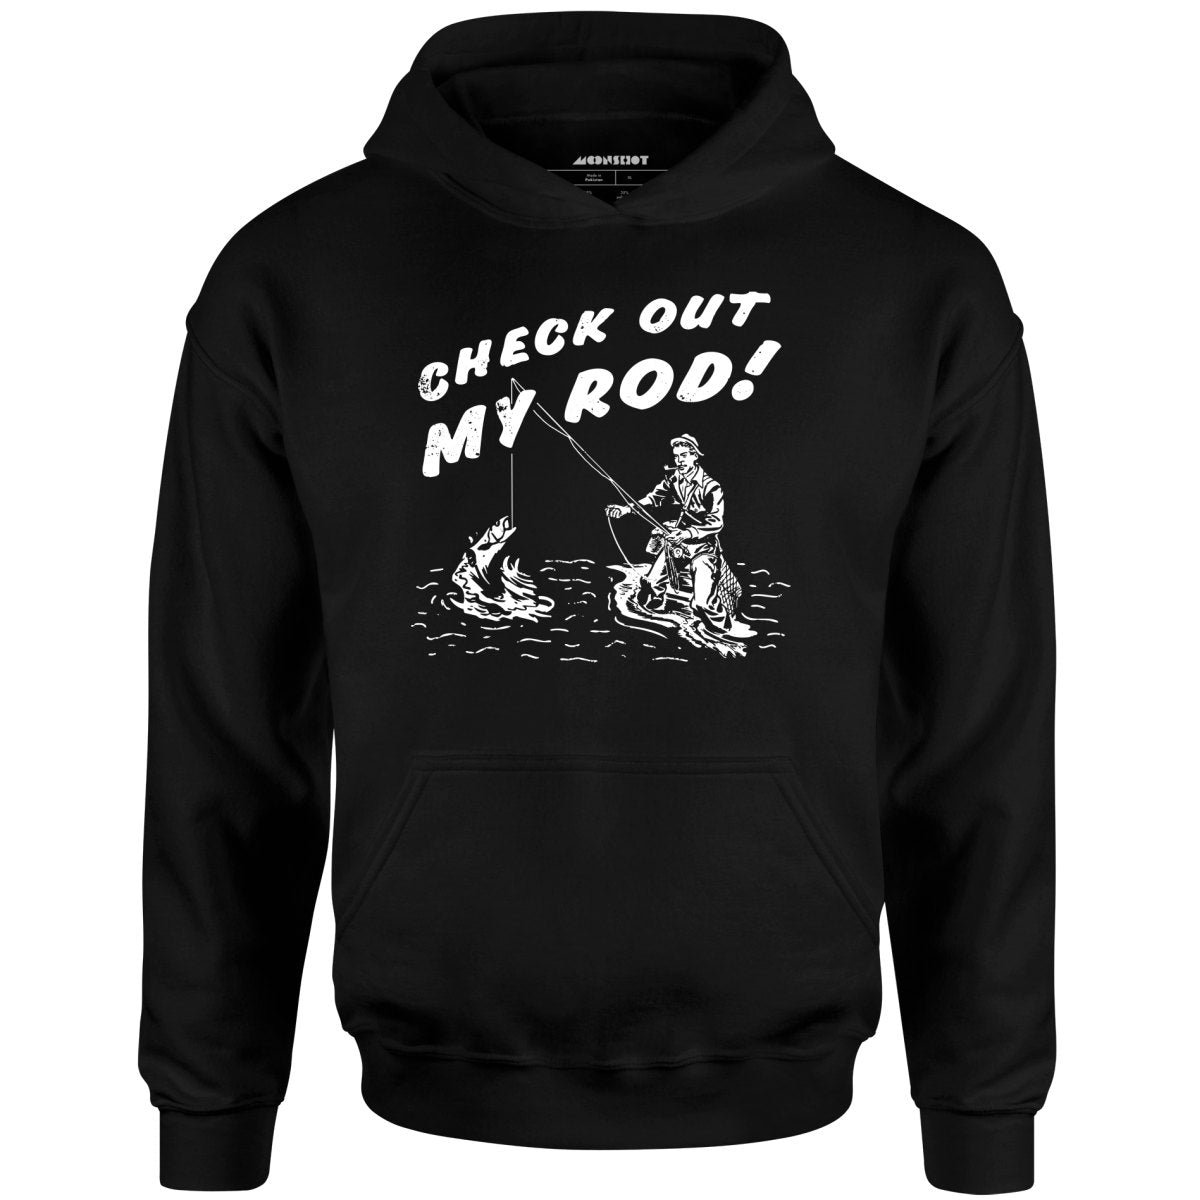 Check Out My Rod - Unisex Hoodie